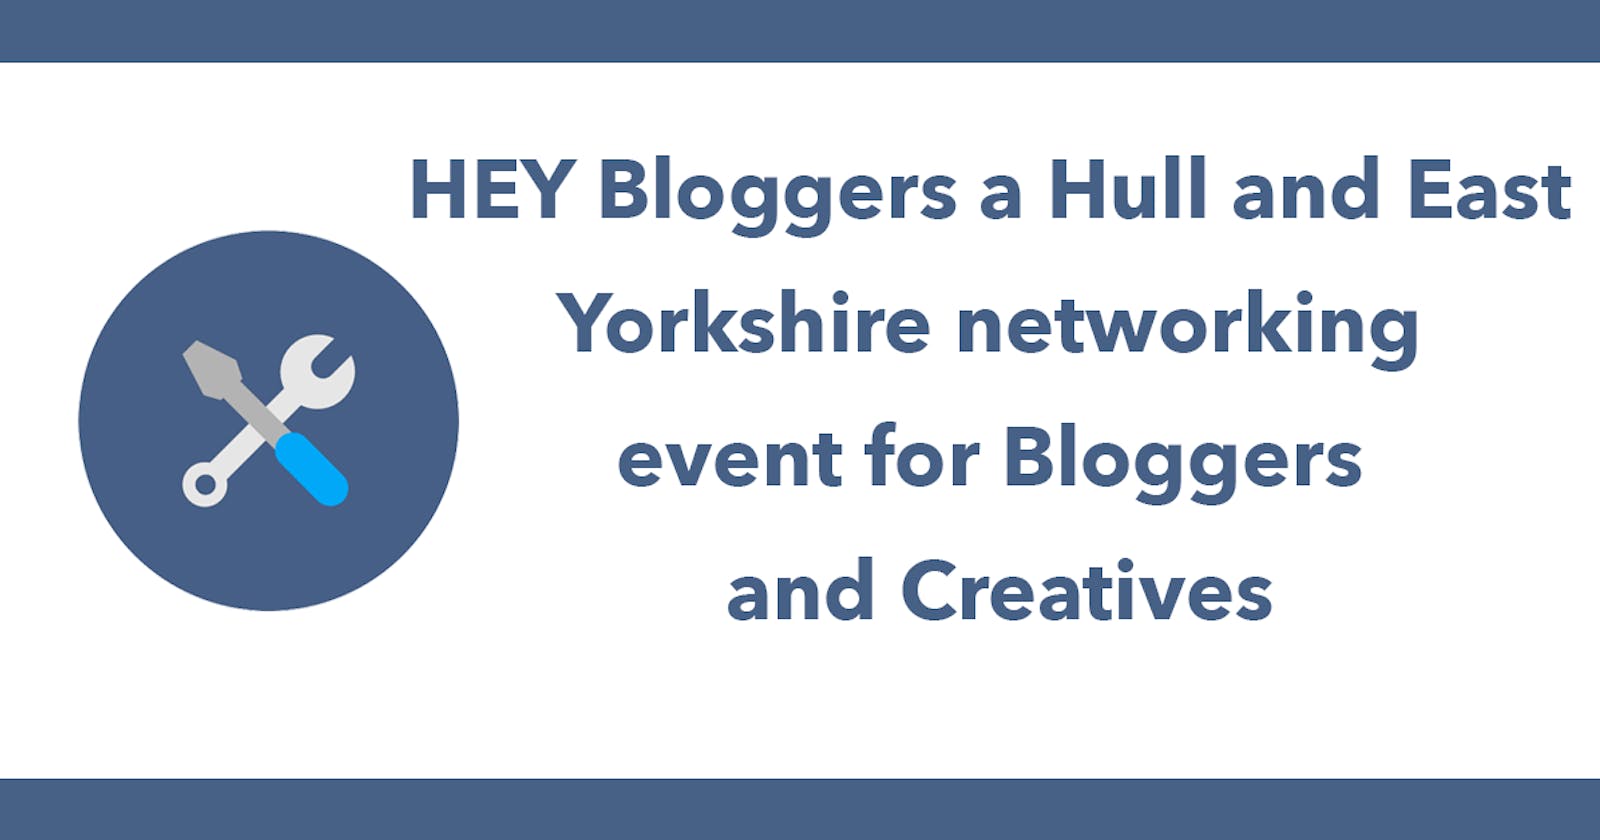 HEY Bloggers - a Hull and East Yorkshire networking event for Bloggers and Creatives